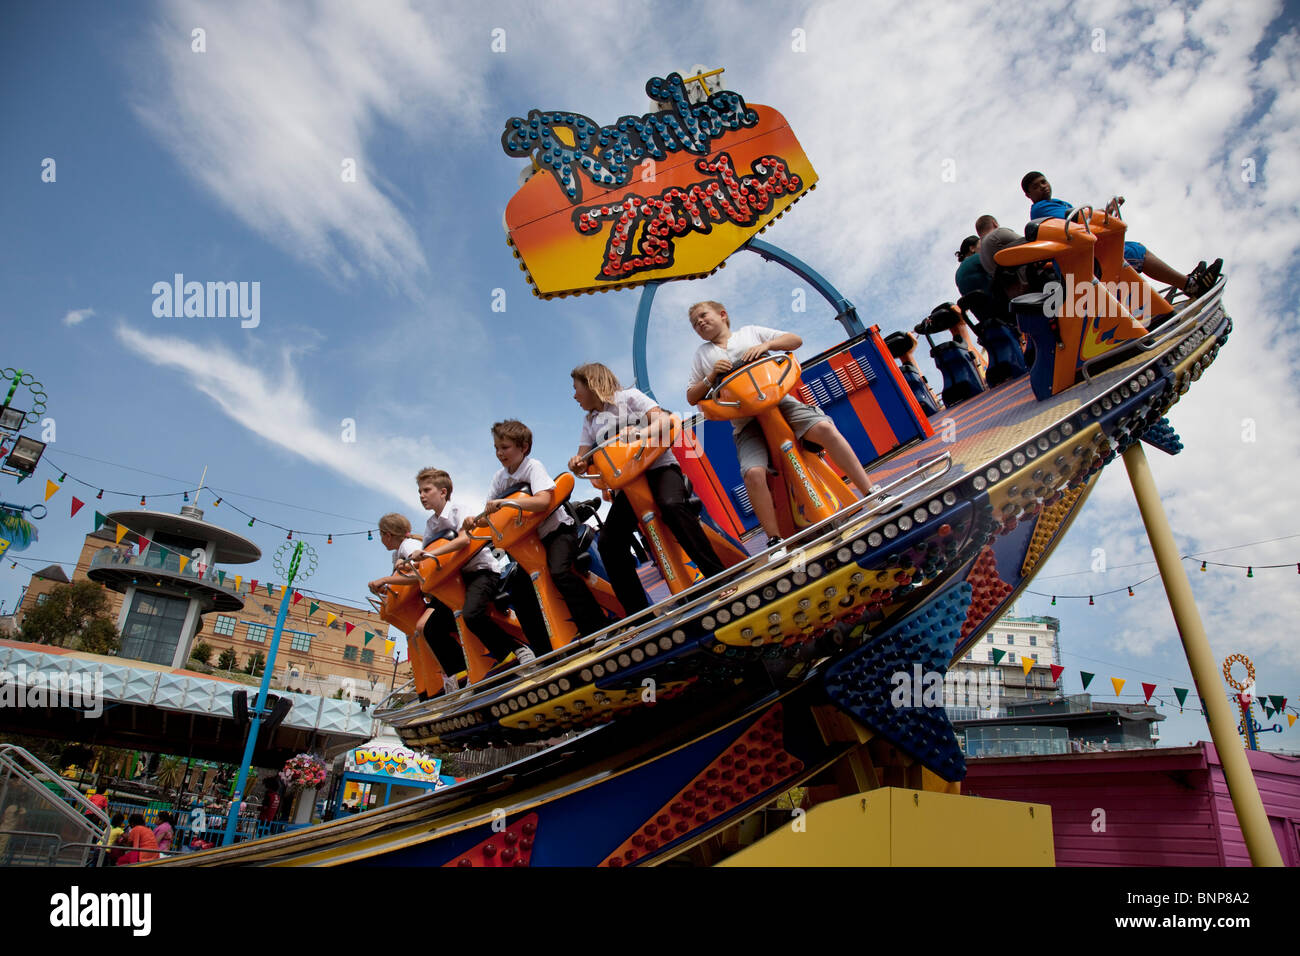 Rides & Attractions - The Best Rides & Rollercoasters in Southend! - Adventure  Island